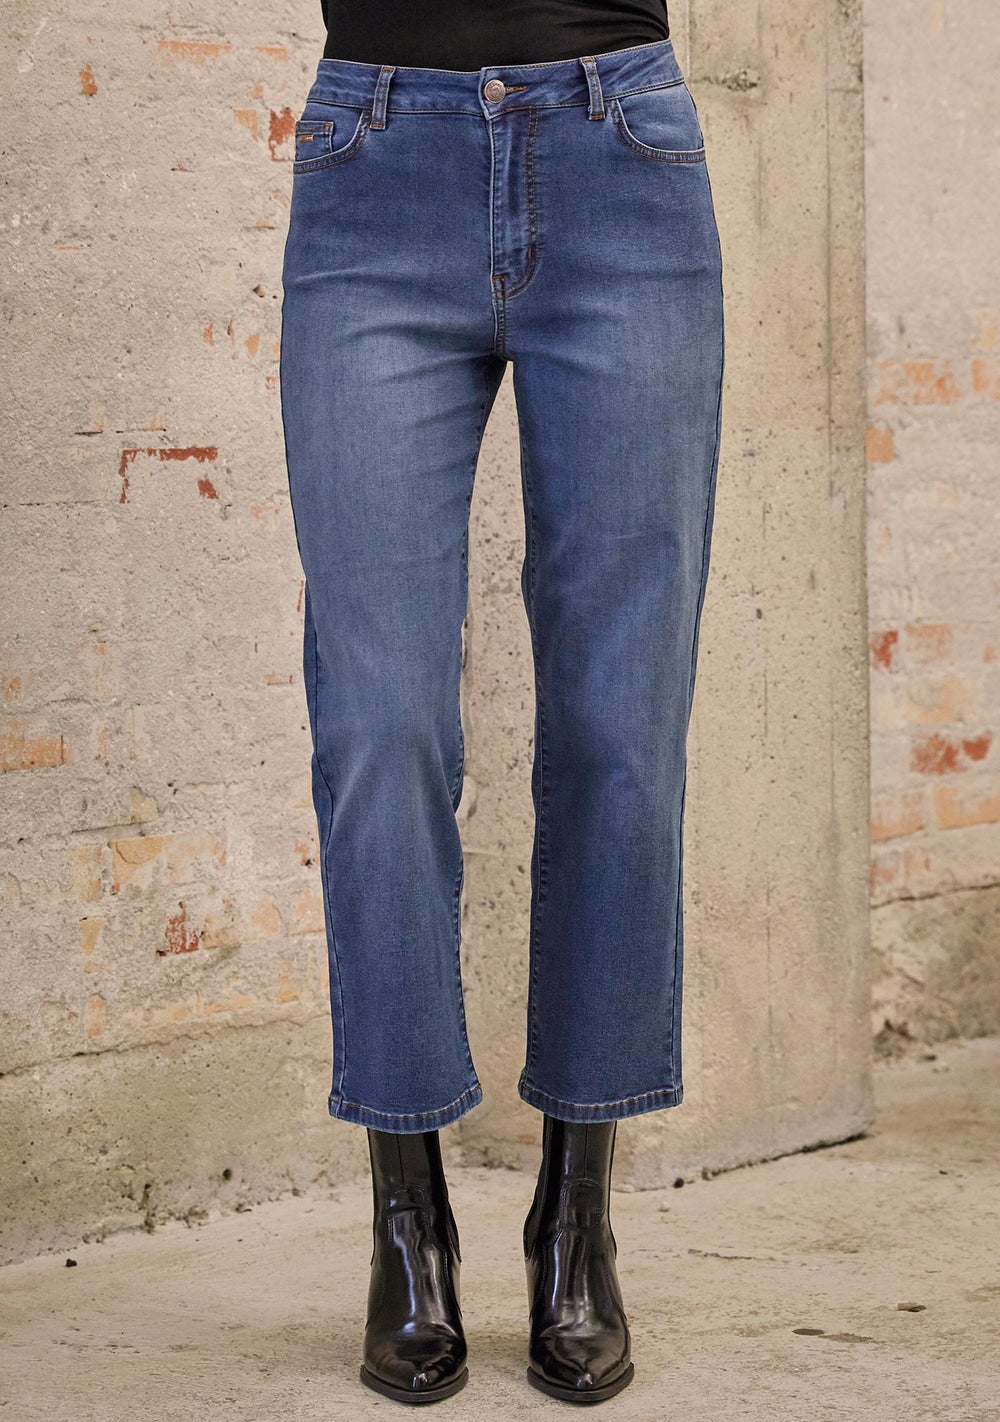 Isay - Lido Straight Jeans-Blue Wash Denim